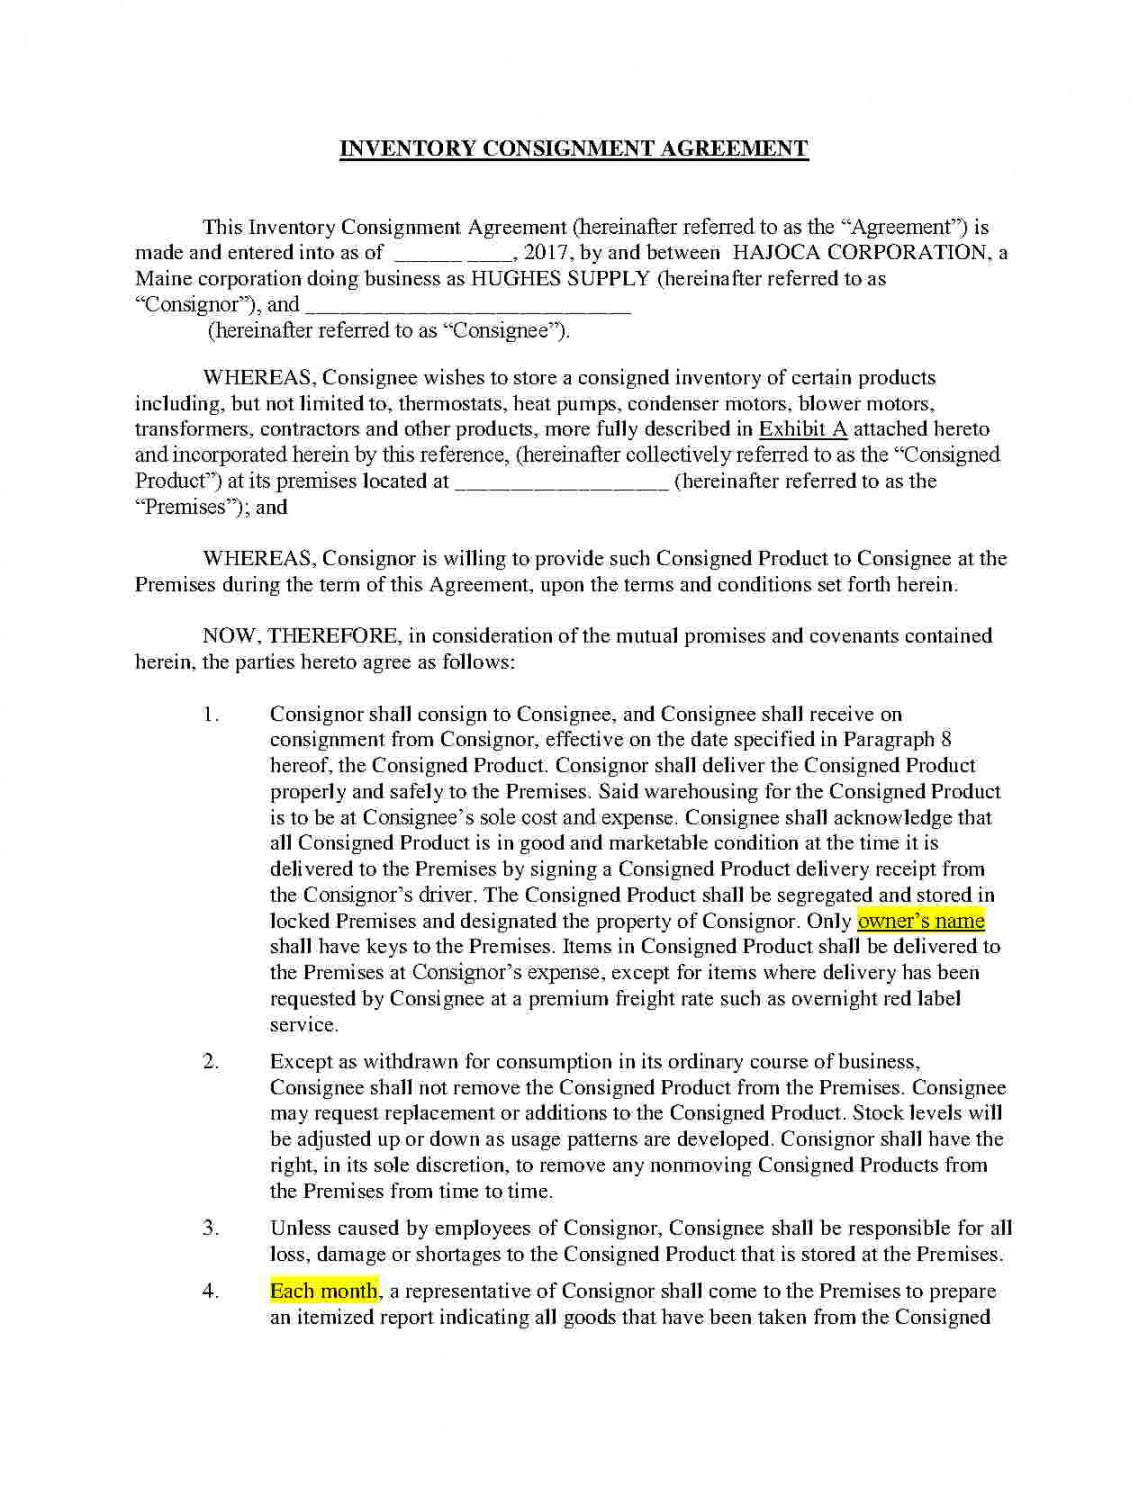 Inventory Consignment Agreement Consignment Inventory Agreement Template